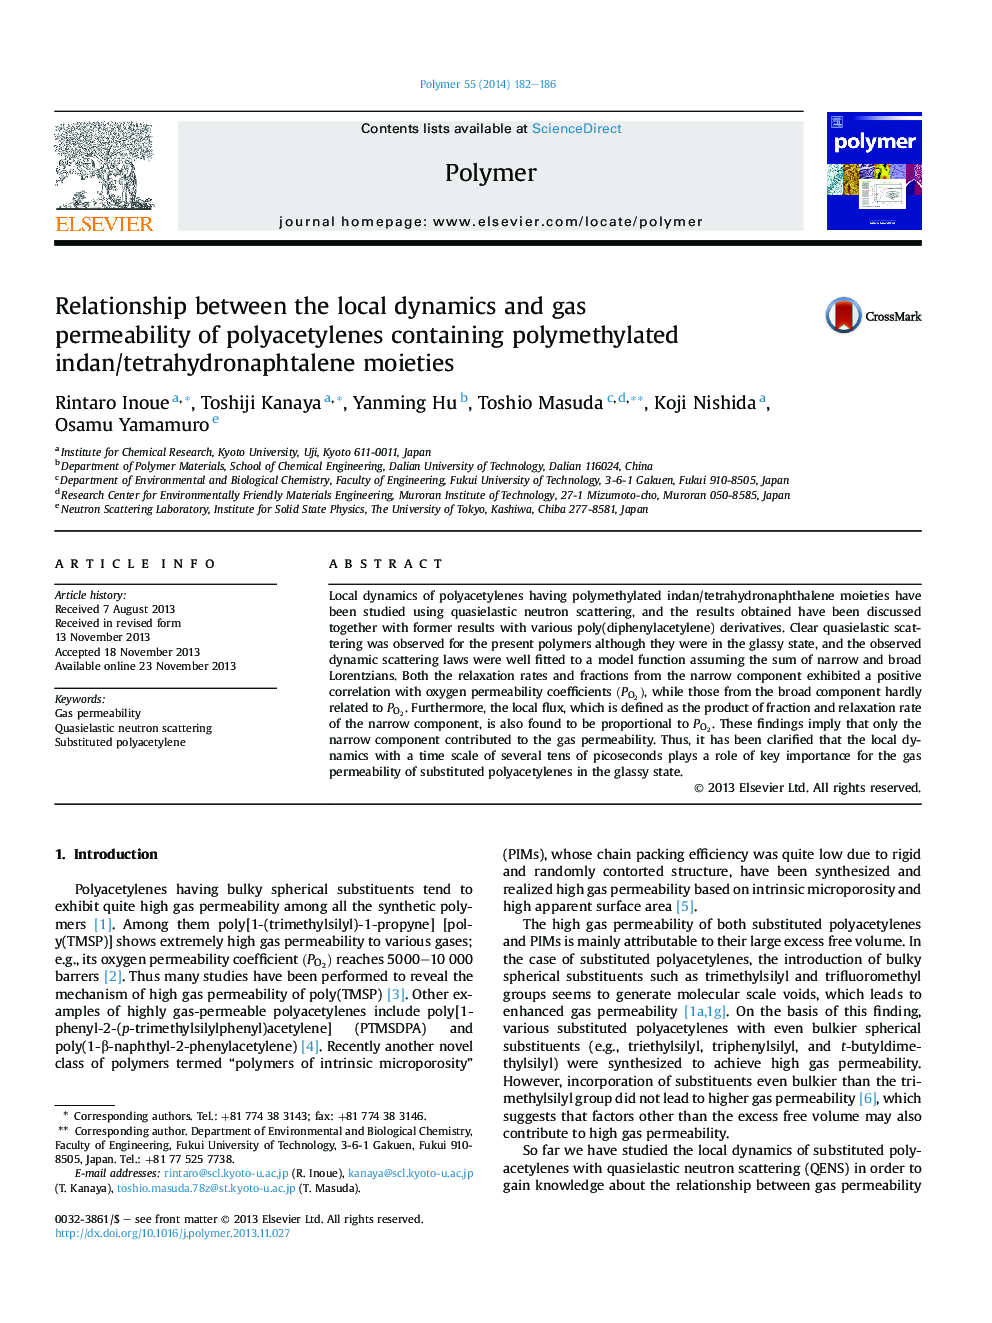 Relationship between the local dynamics and gas permeabilityÂ ofÂ polyacetylenes containing polymethylated indan/tetrahydronaphtalene moieties